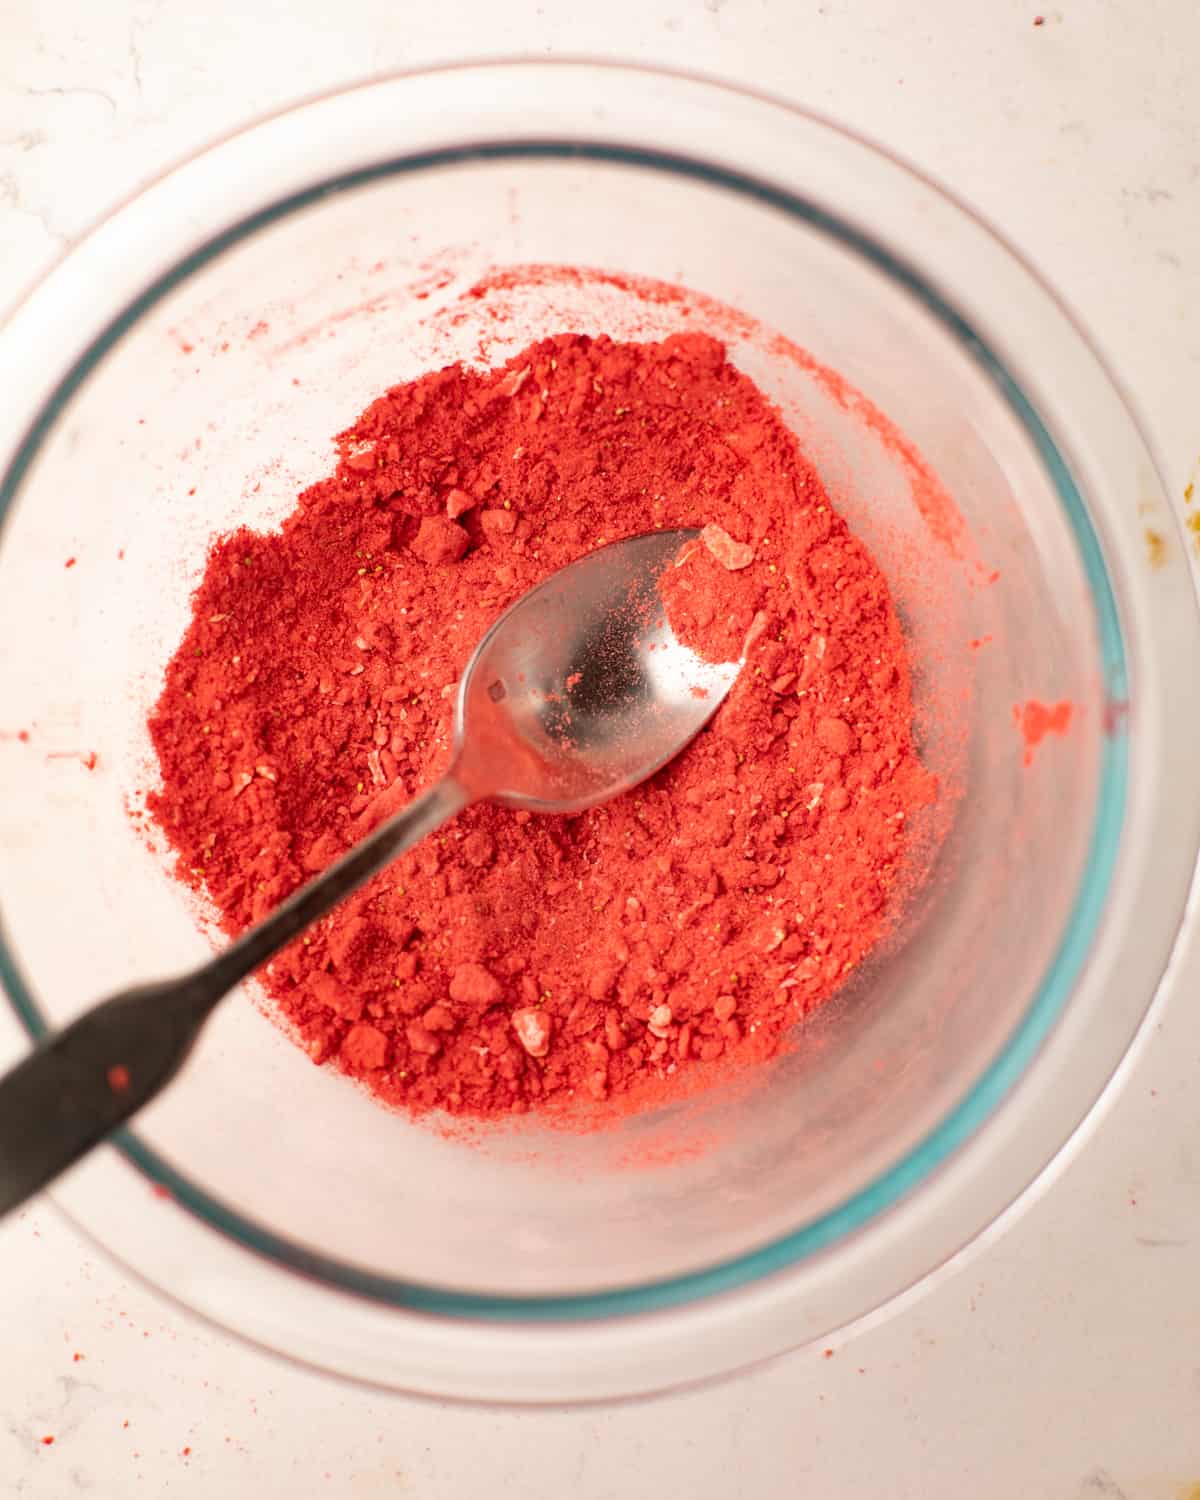 freeze-dried strawberries blended into a powder in a bowl with a spoon.